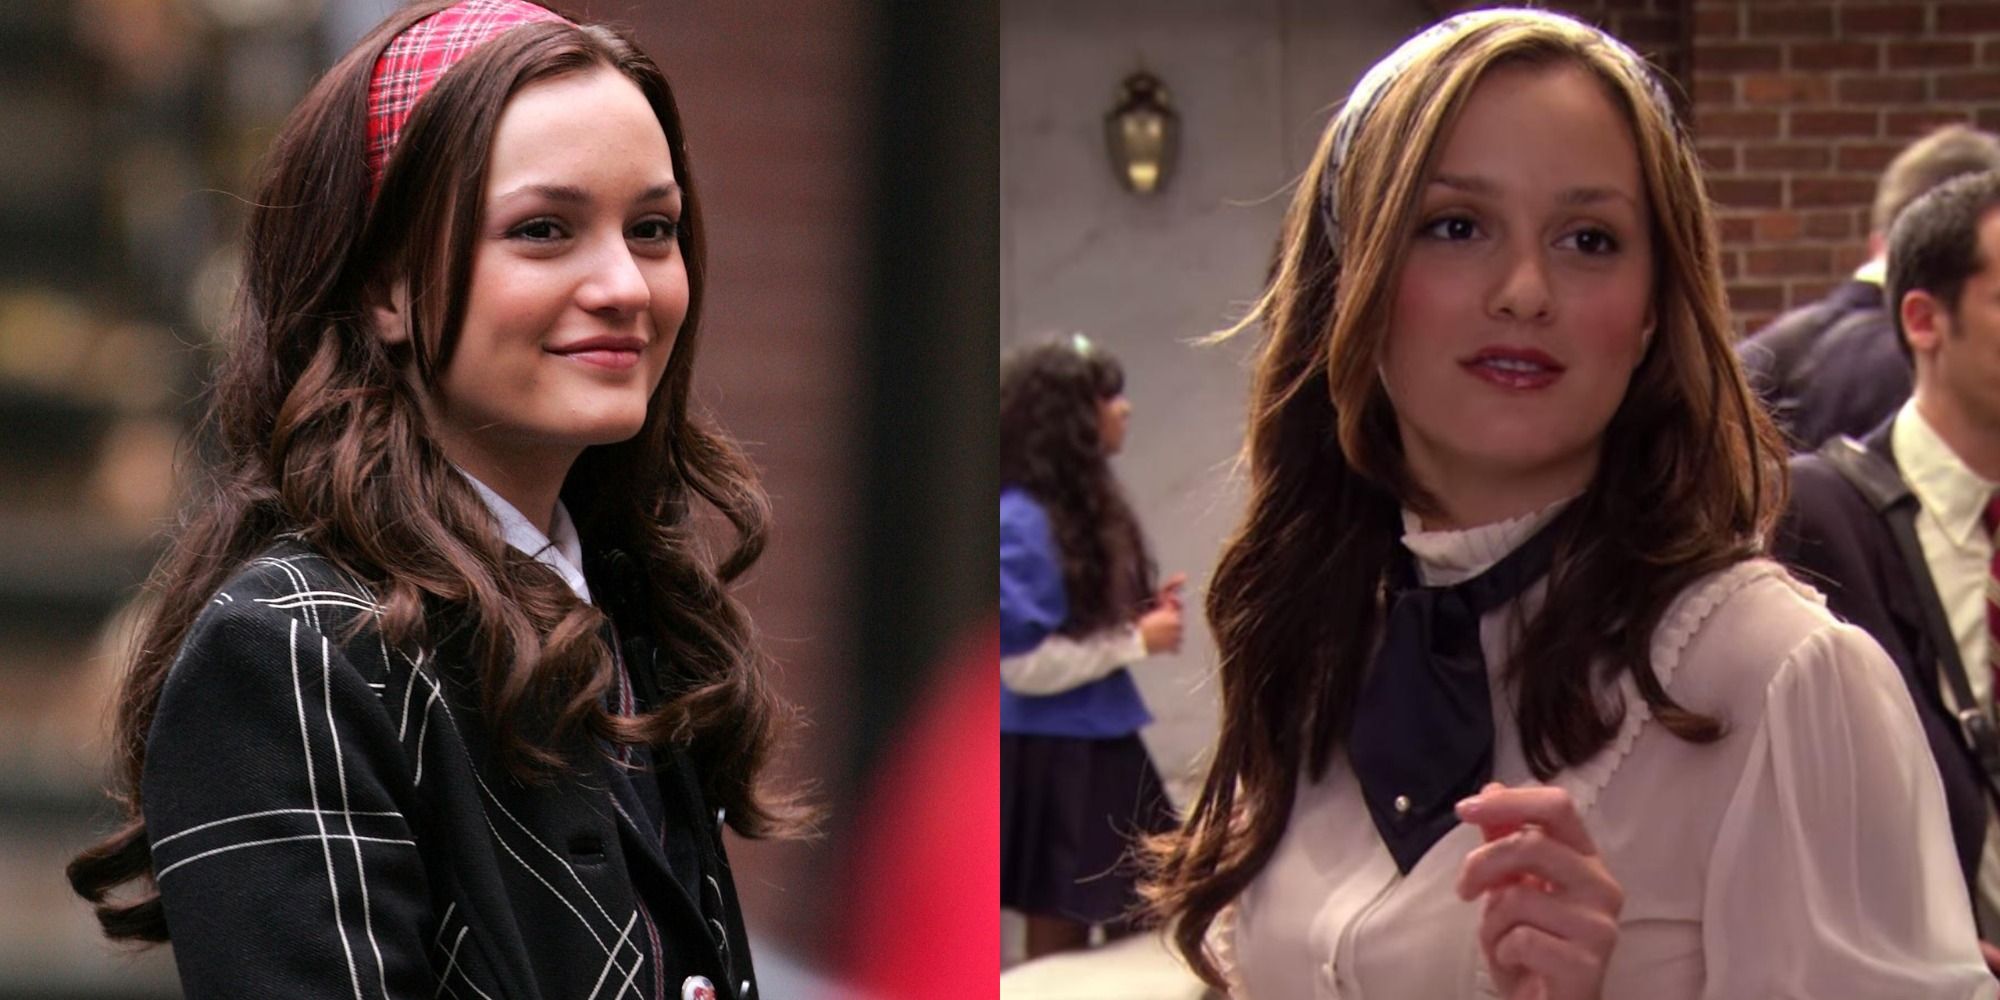 Two side by side images of Blair from Gossip Girl